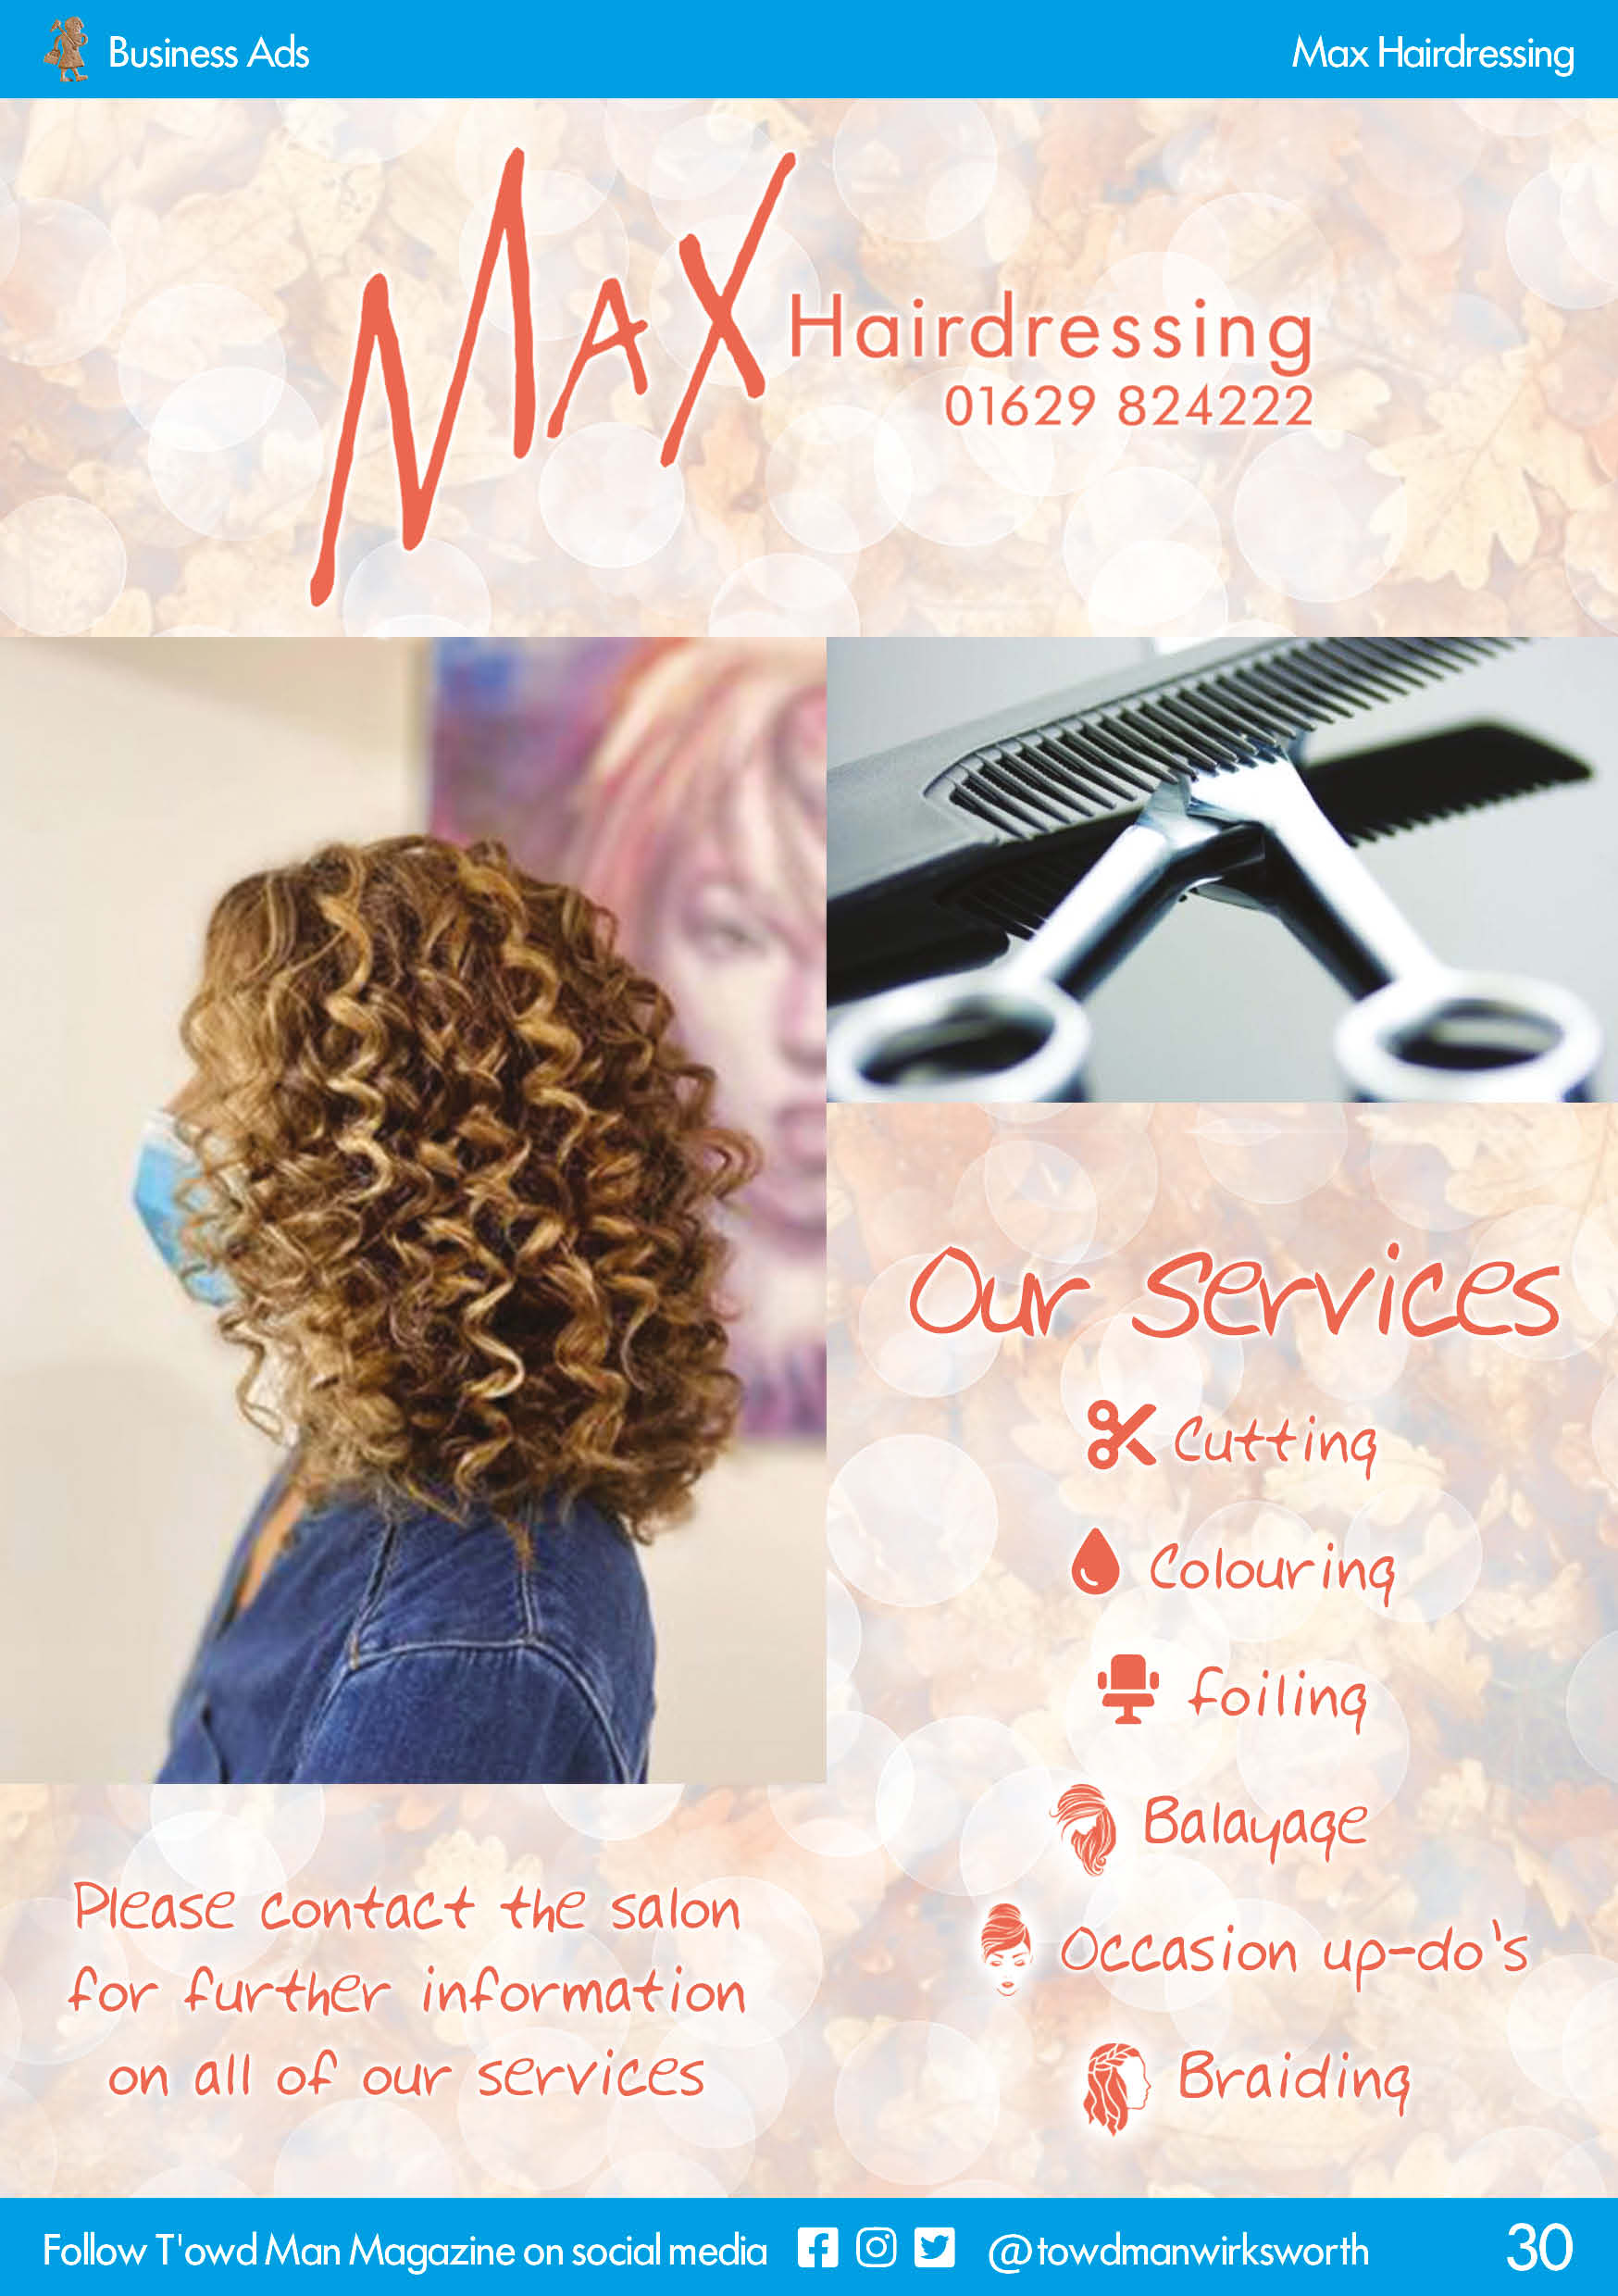 Max Hairdressing